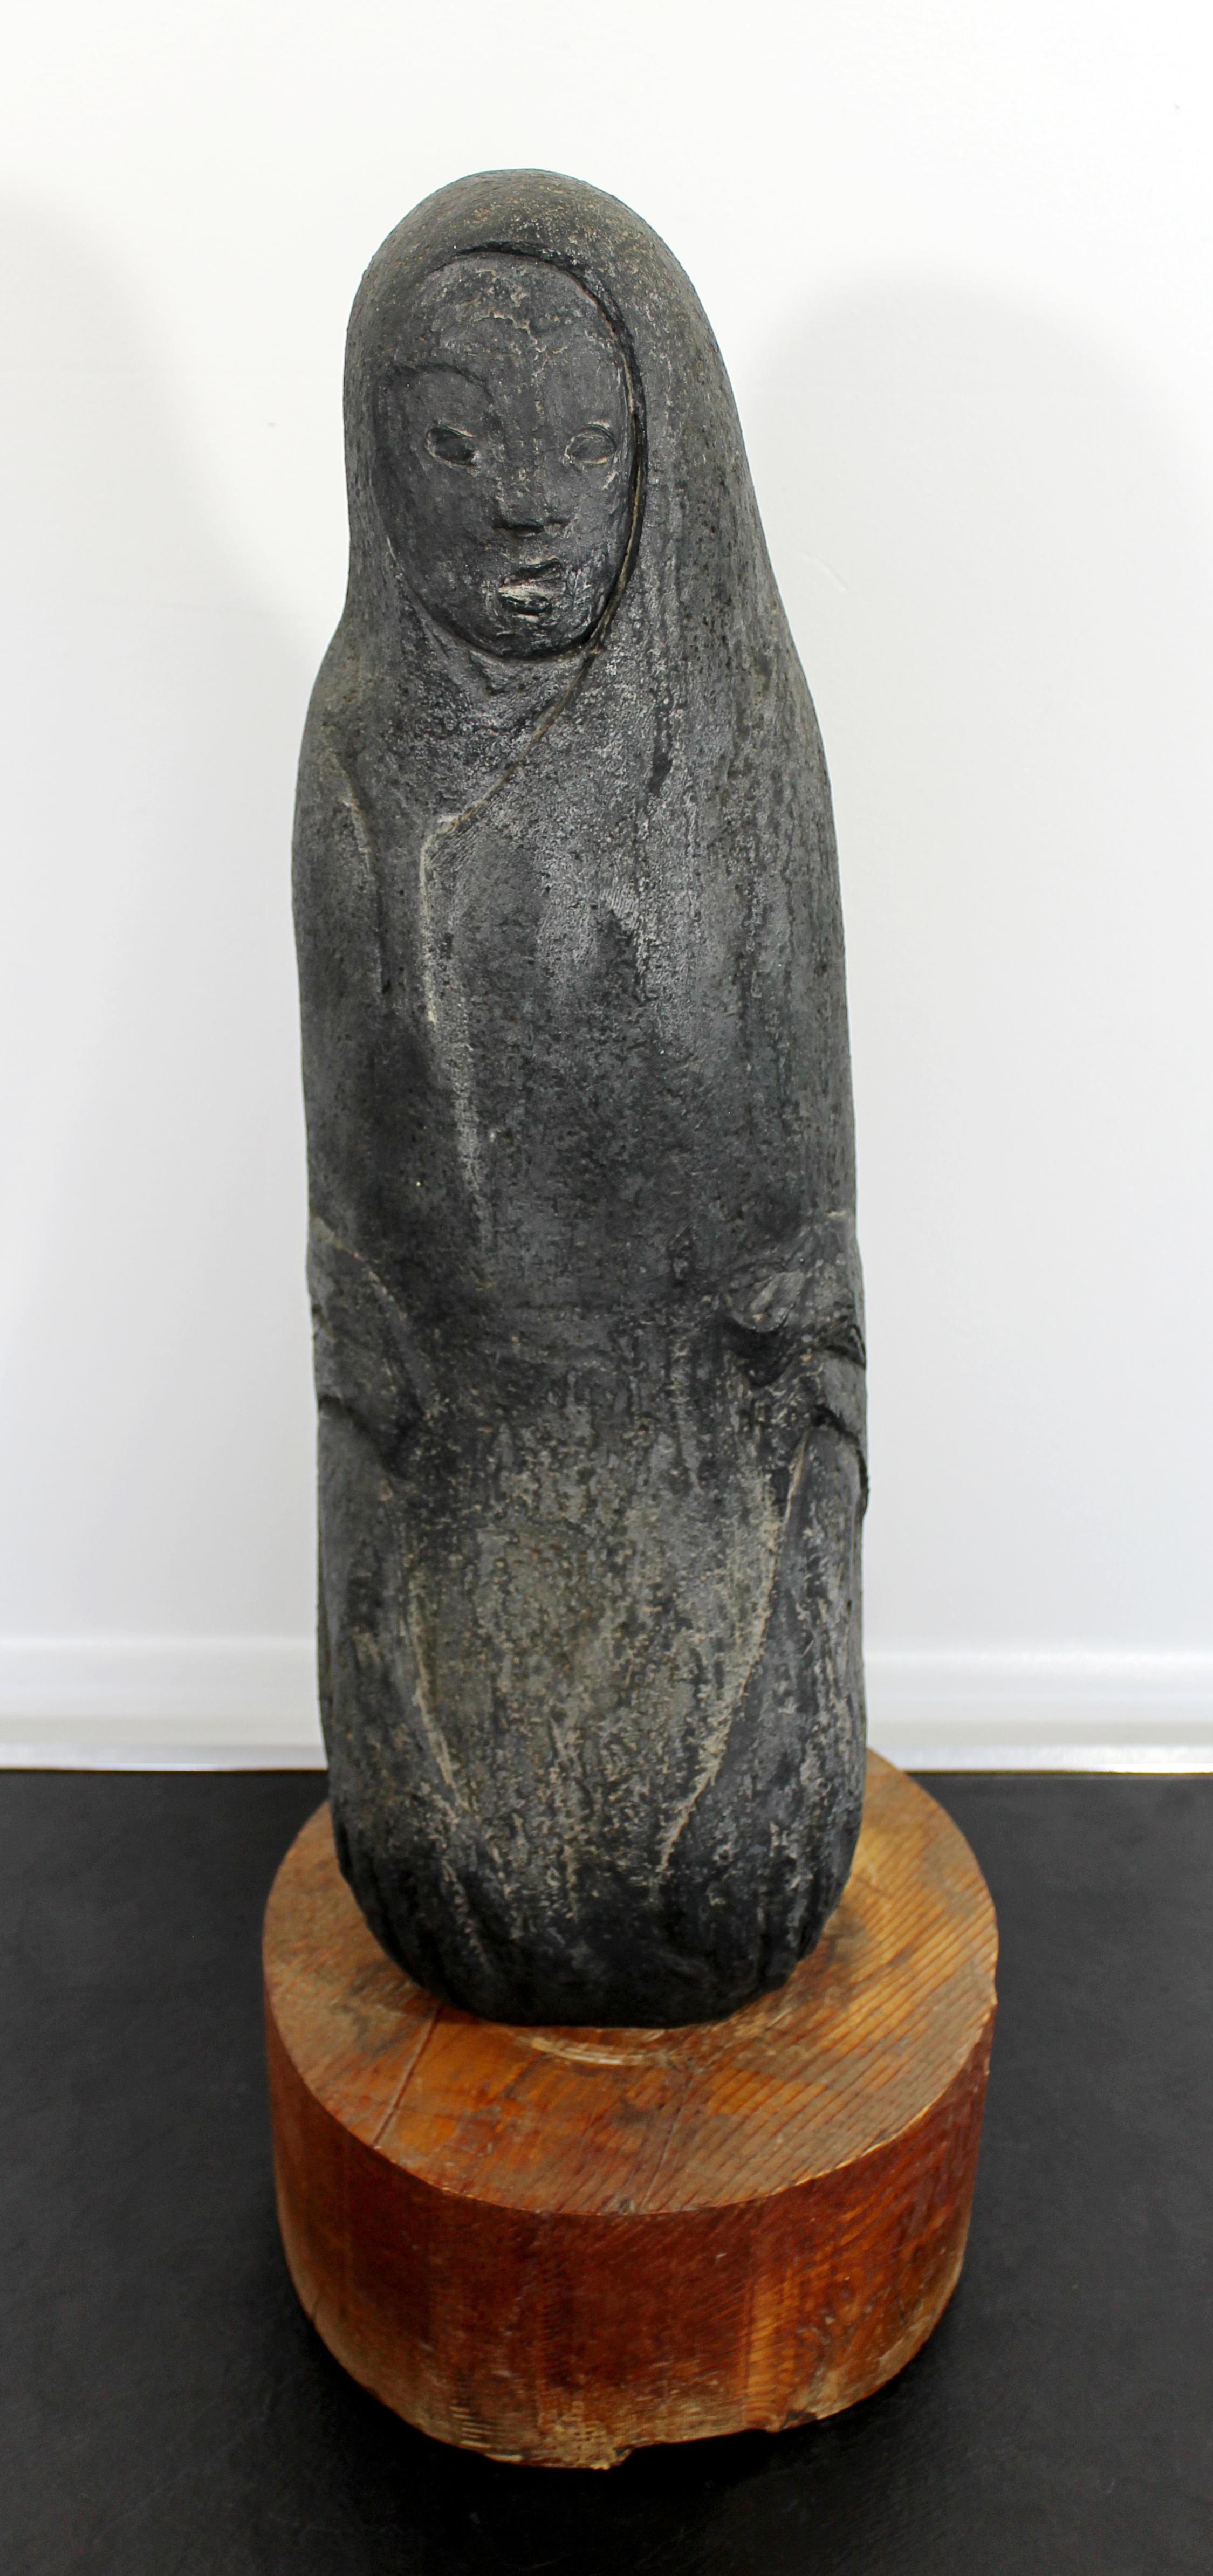 For your consideration is a stunning, porous stone sculpture of an abstracted figure, on a wooden base. In excellent condition. The dimensions are 9.5